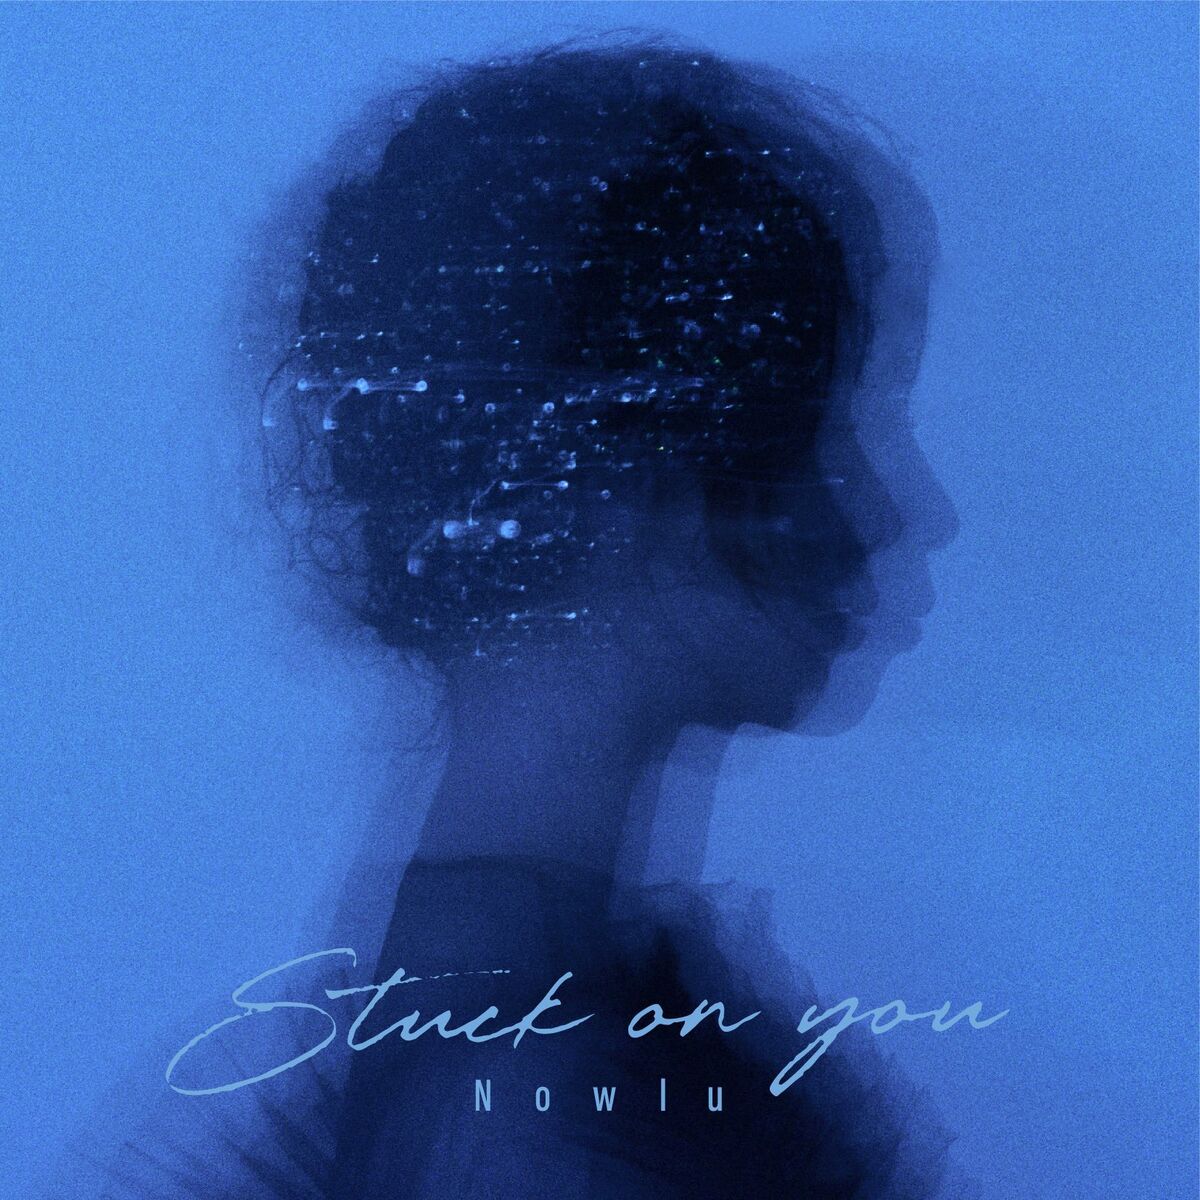 Stuck on You (feat. Yot Club)  April June Lyrics, Meaning & Videos